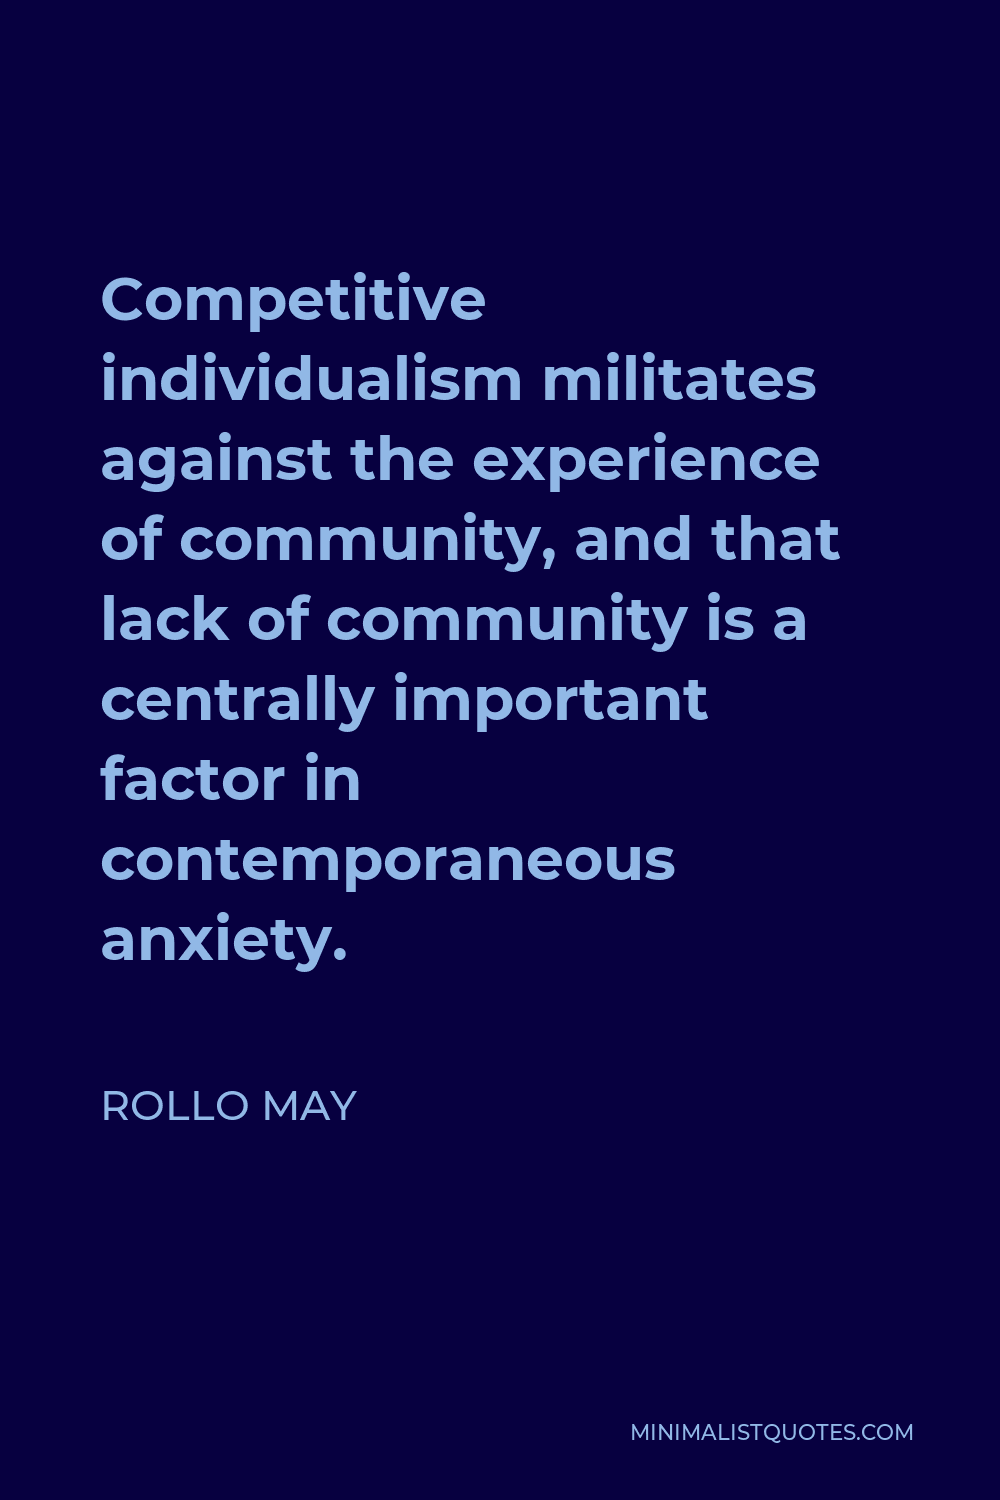 Rollo May Quote - Competitive individualism militates against the experience of community, and that lack of community is a centrally important factor in contemporaneous anxiety.